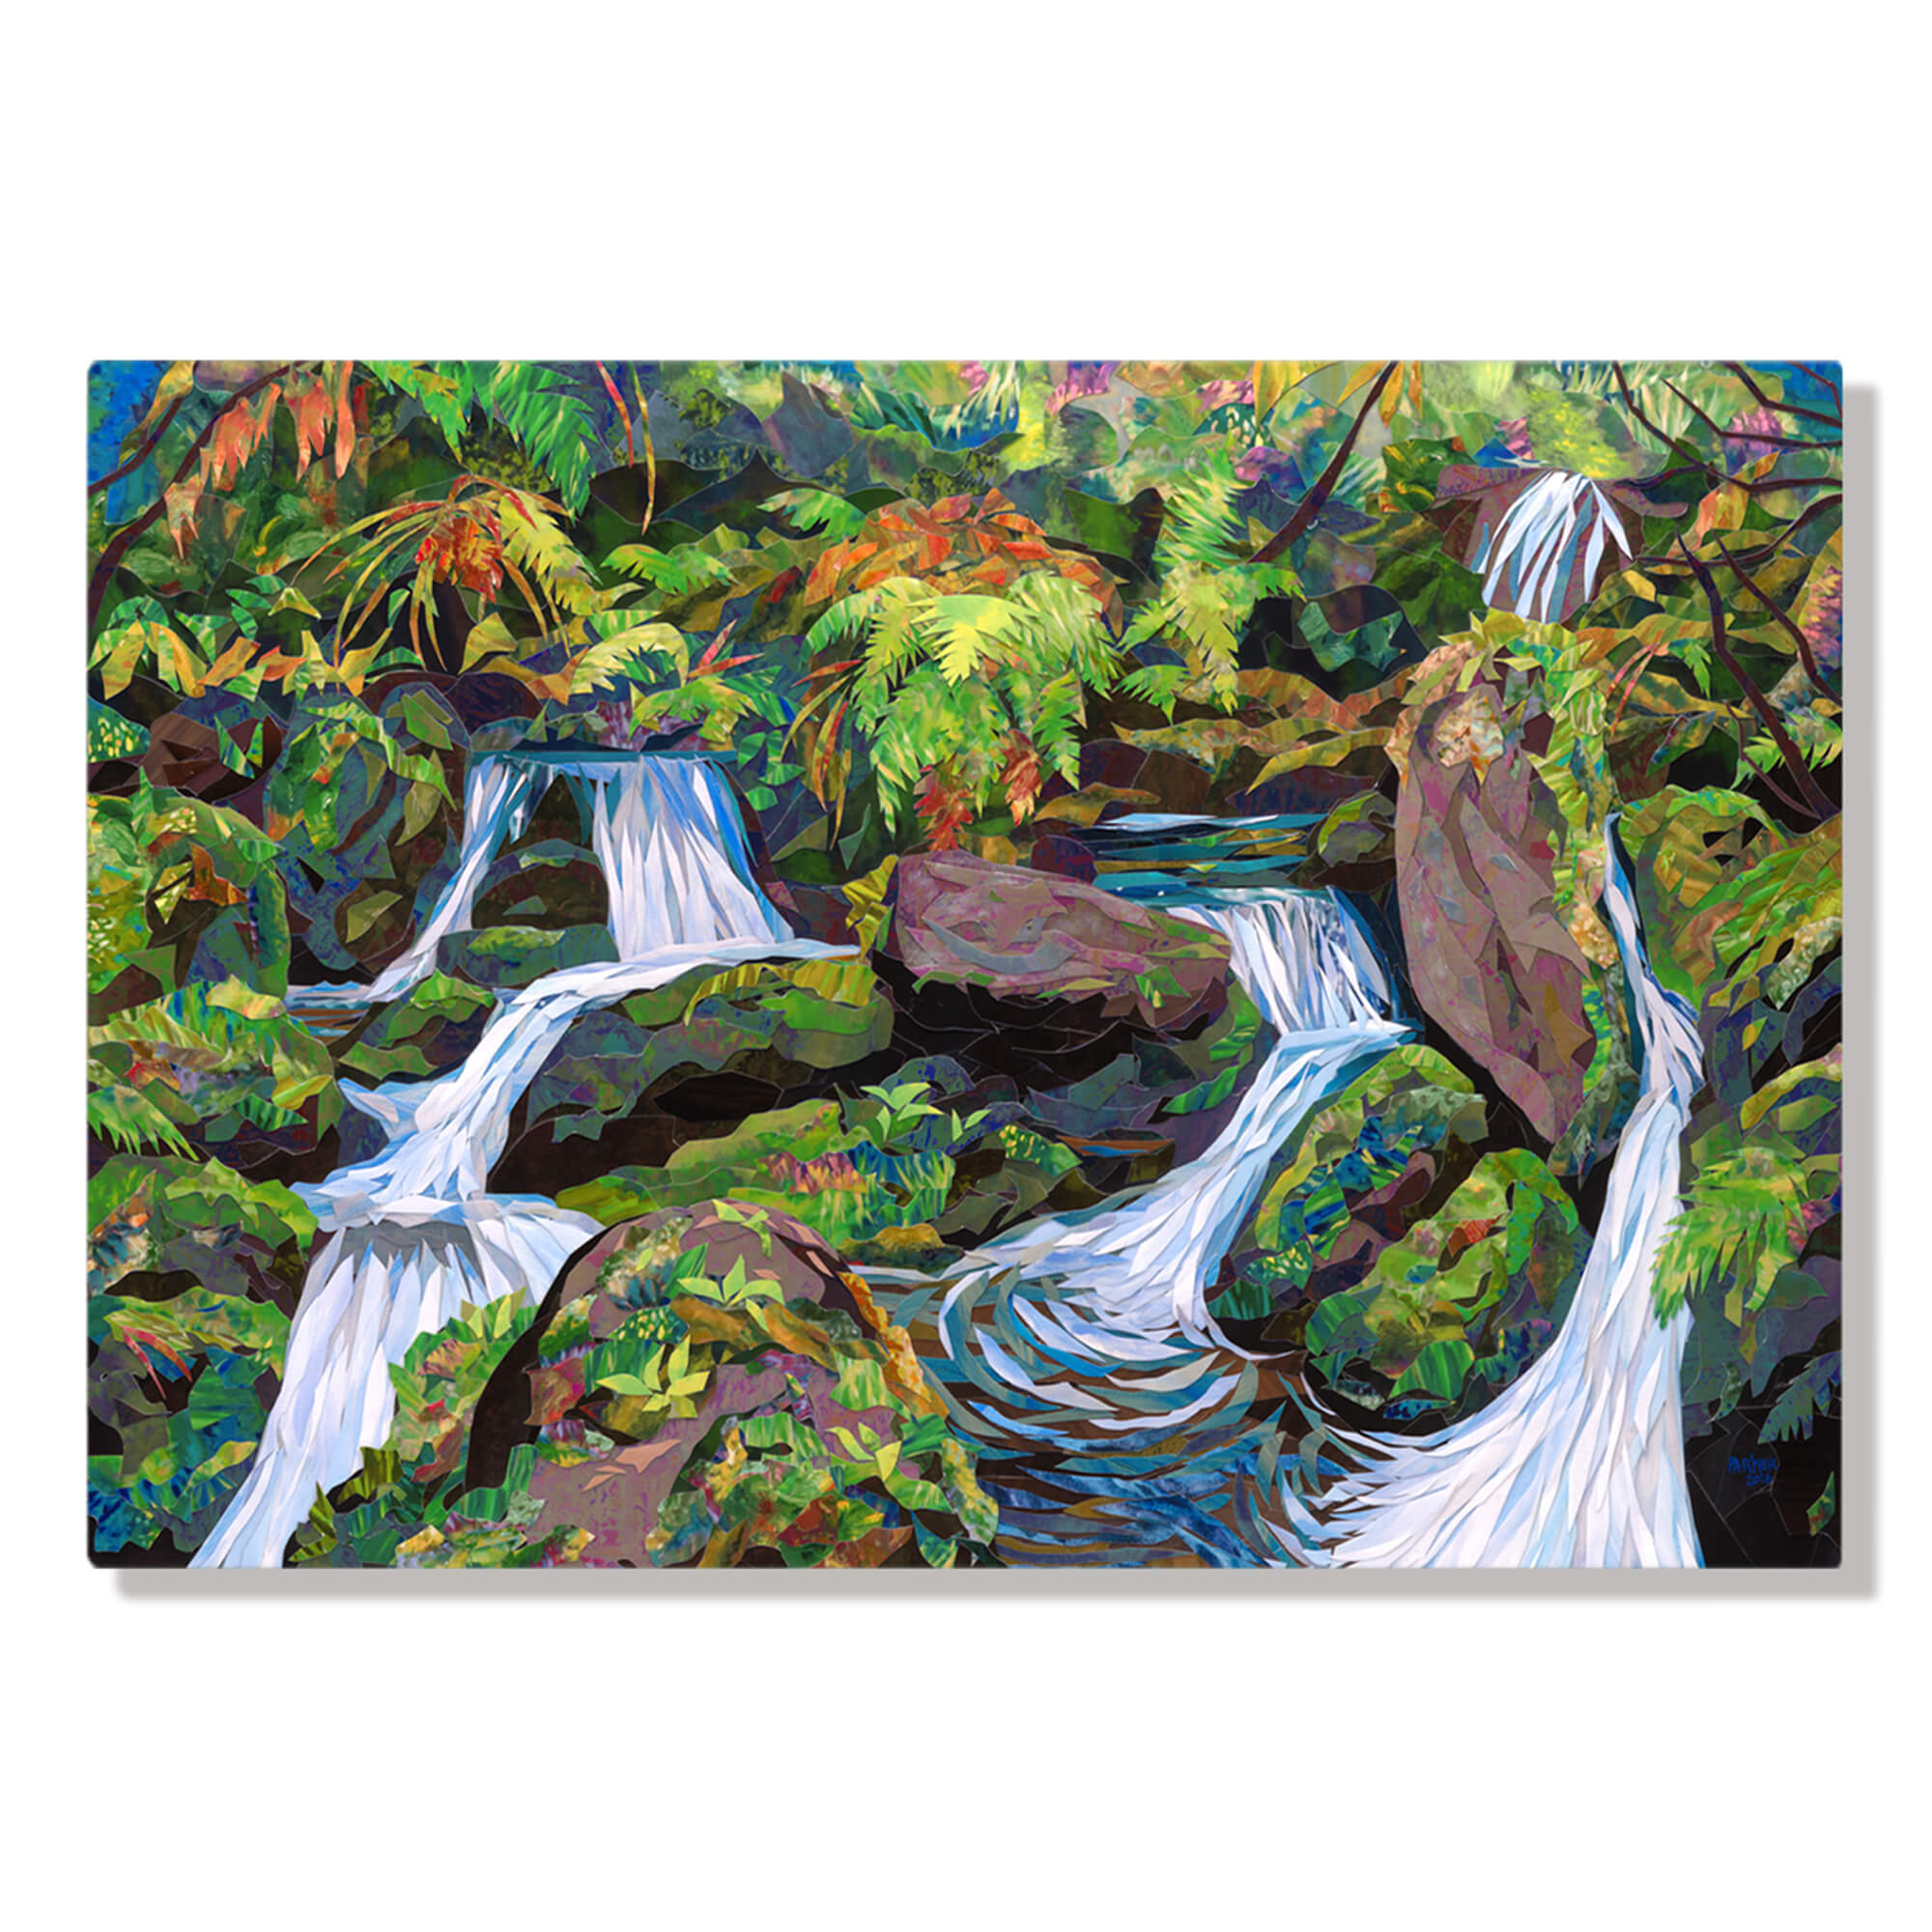 A metal art print featuring a collage of colorful streams of water surrounded by tropical plants, by Maui artist Patrick Parker